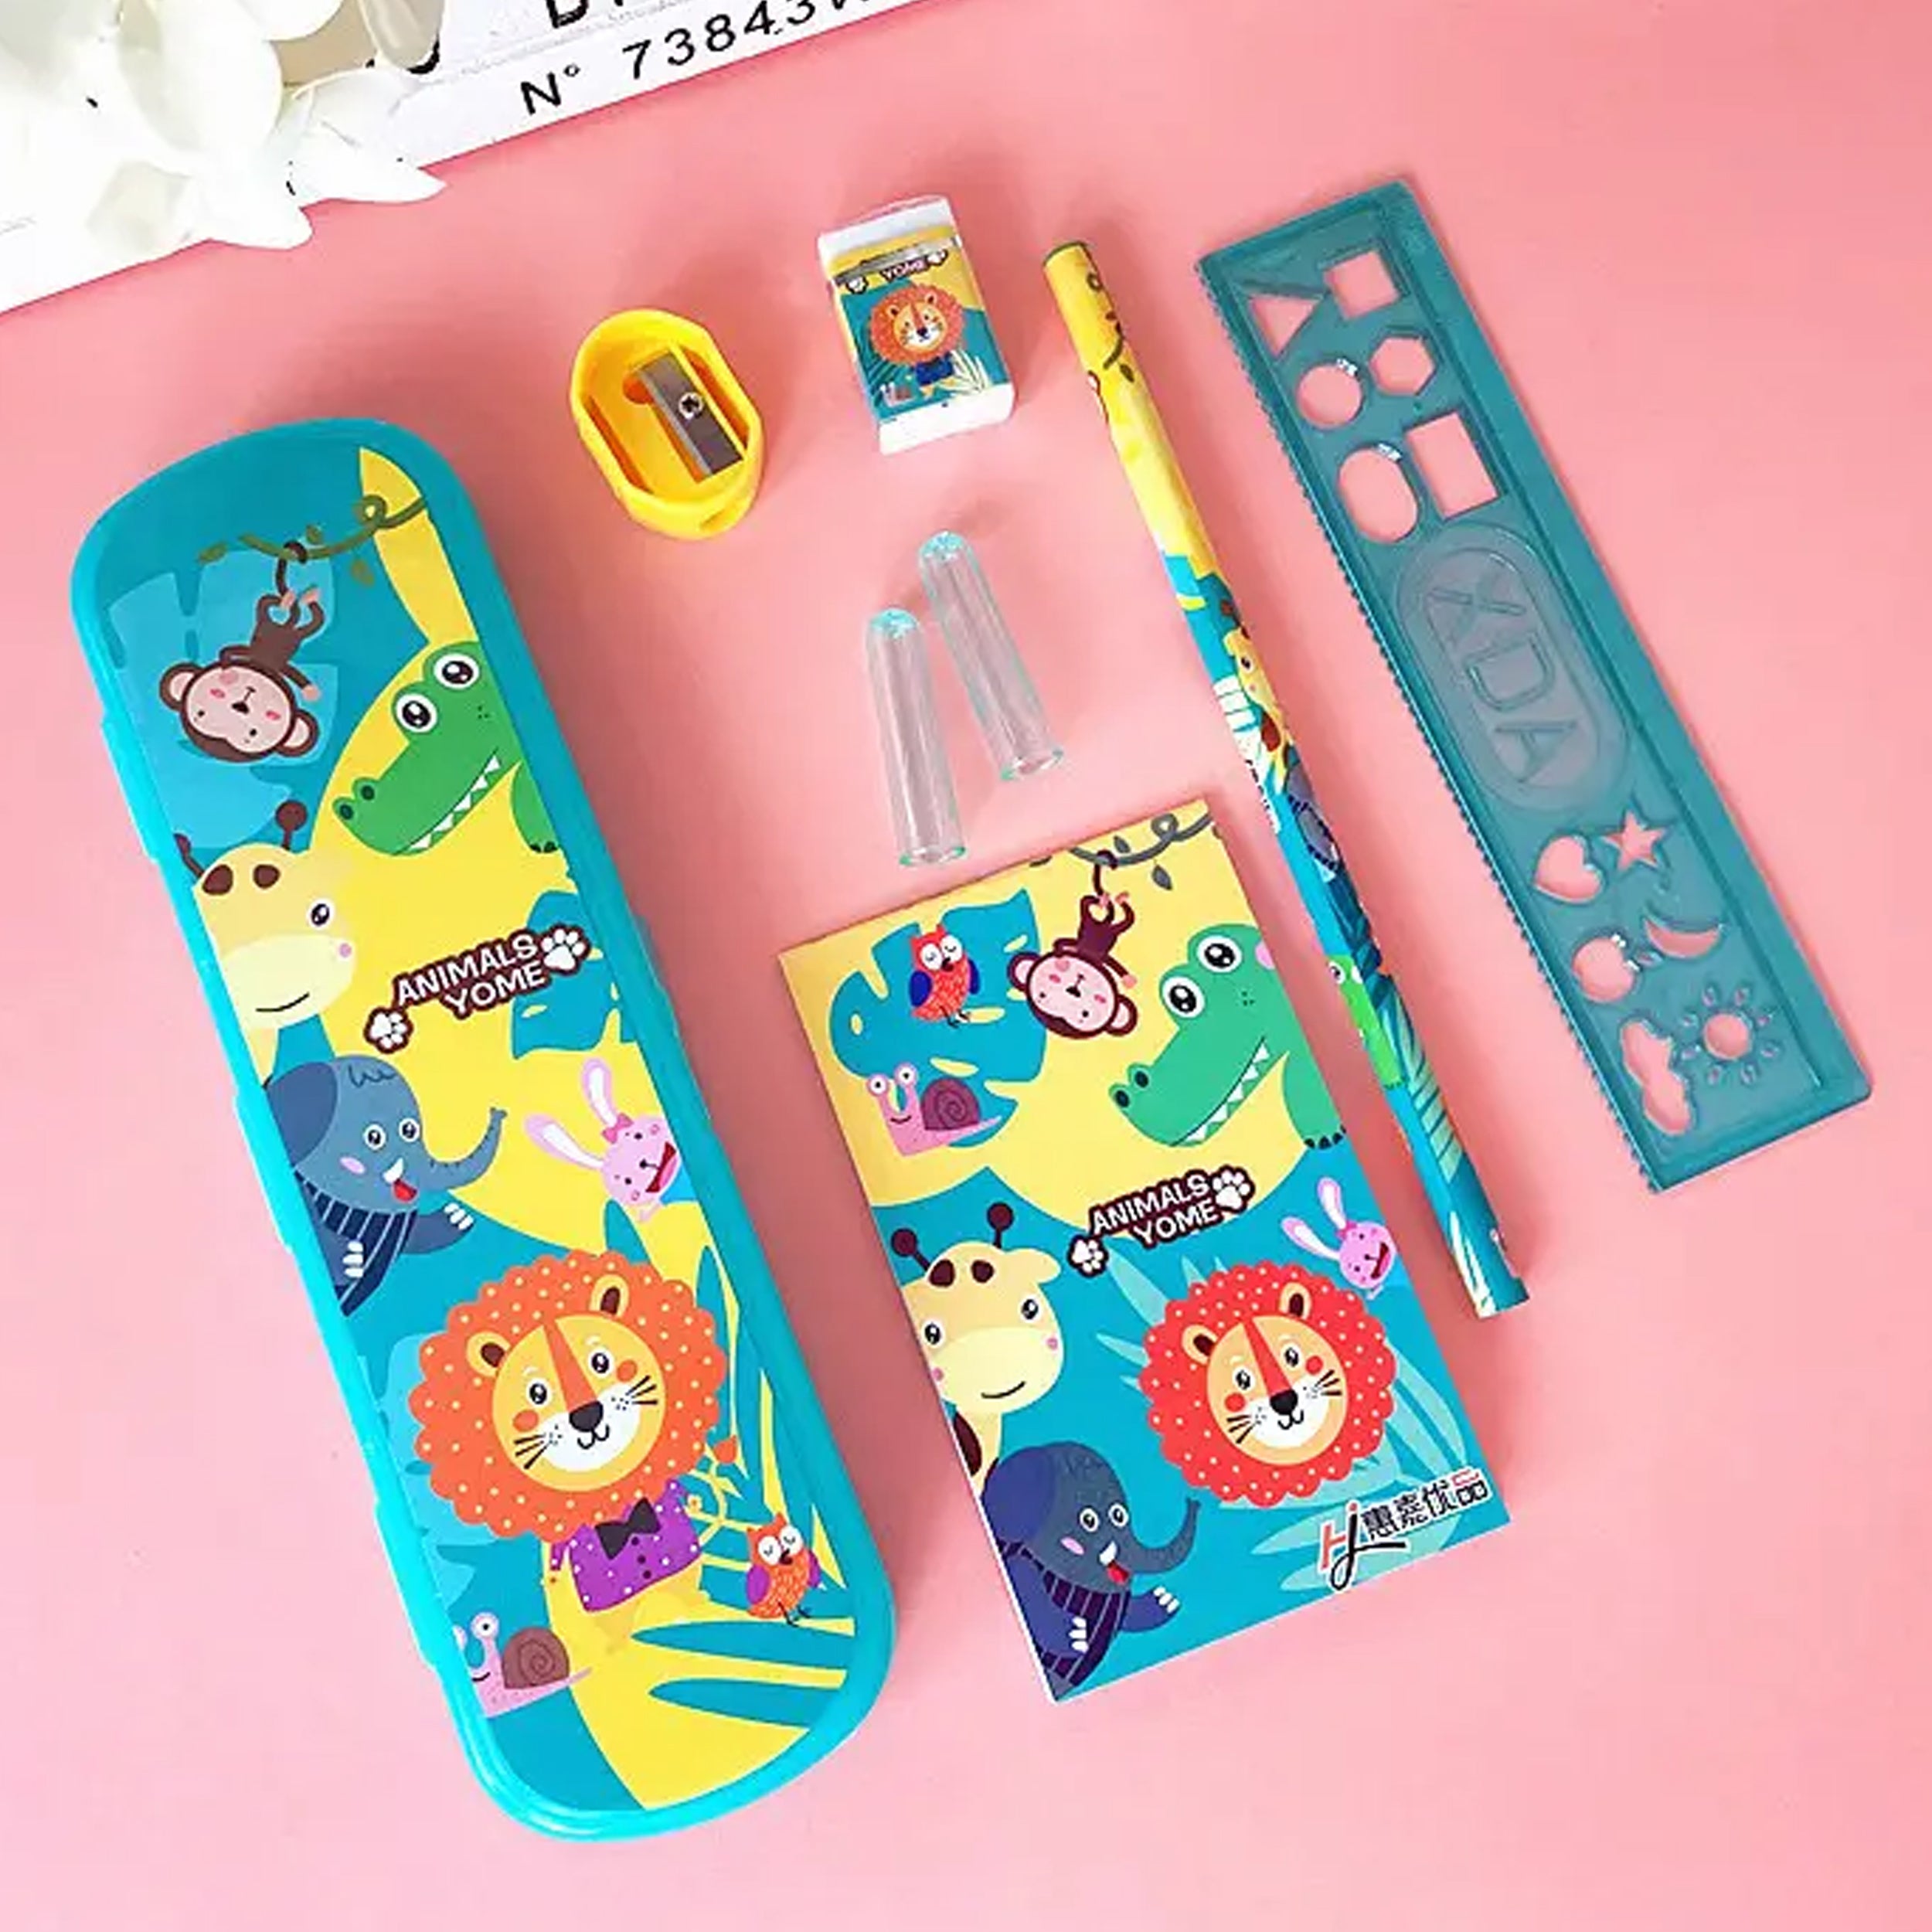 Fun and Functional Children Stationery Set for Creative Kids